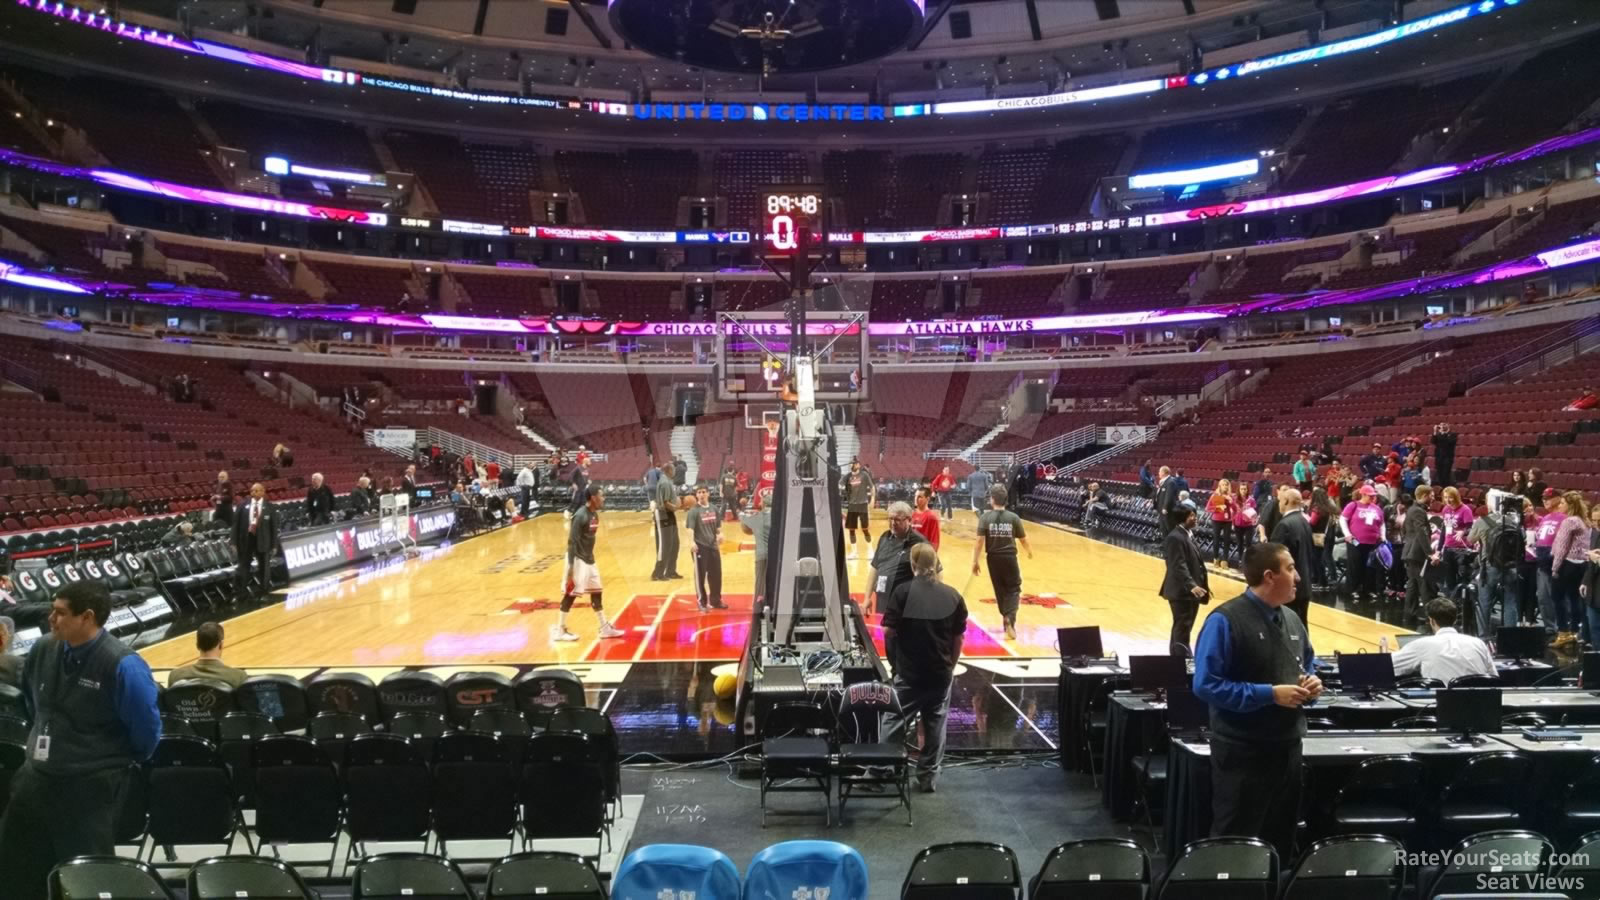 Chicago Bulls - United Center Section 117 - RateYourSeats.com